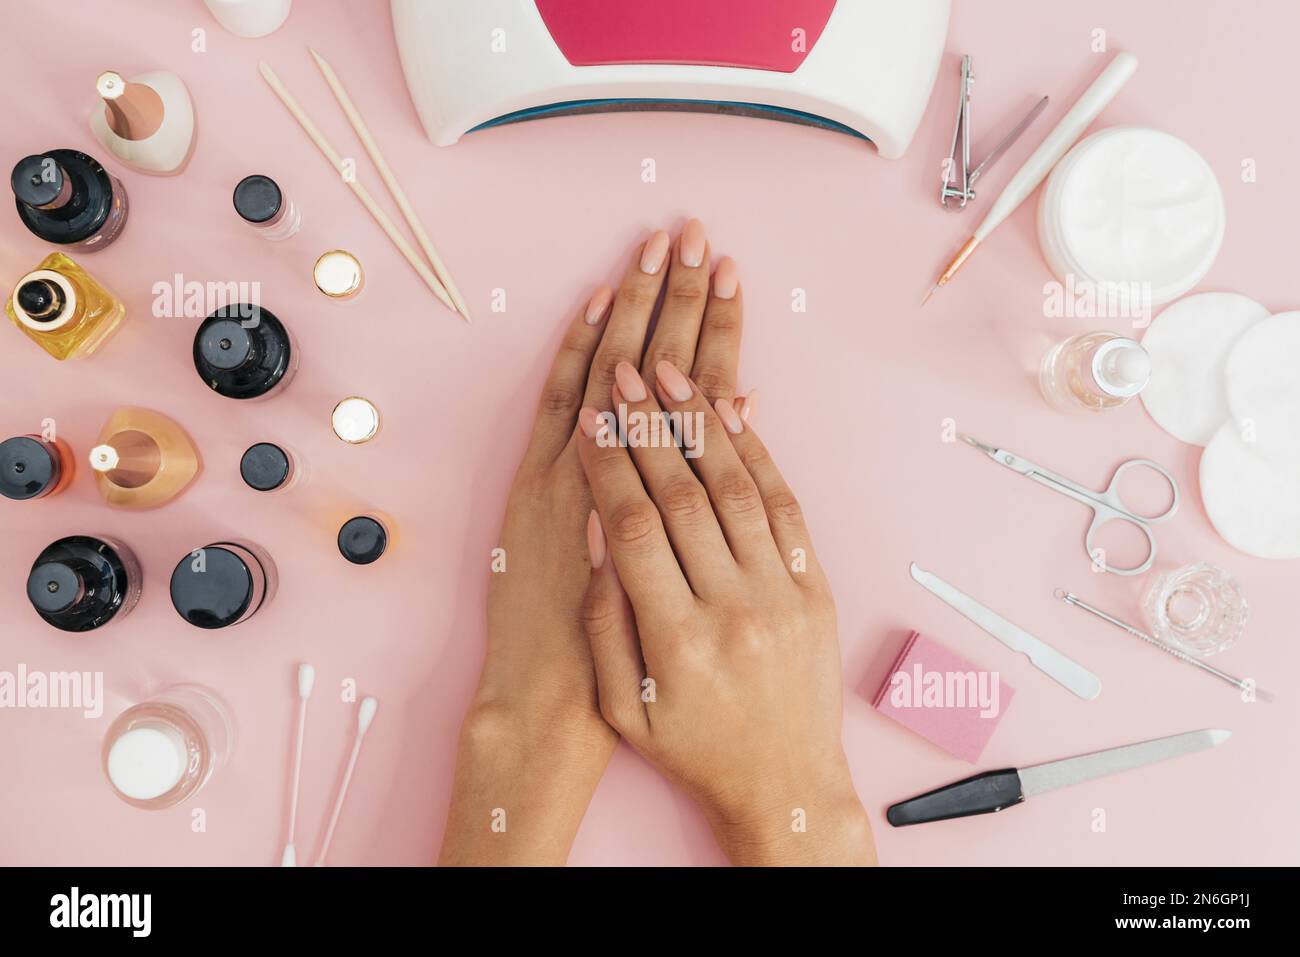 How to Clean Your Nail & Beauty Tools | Salons Direct